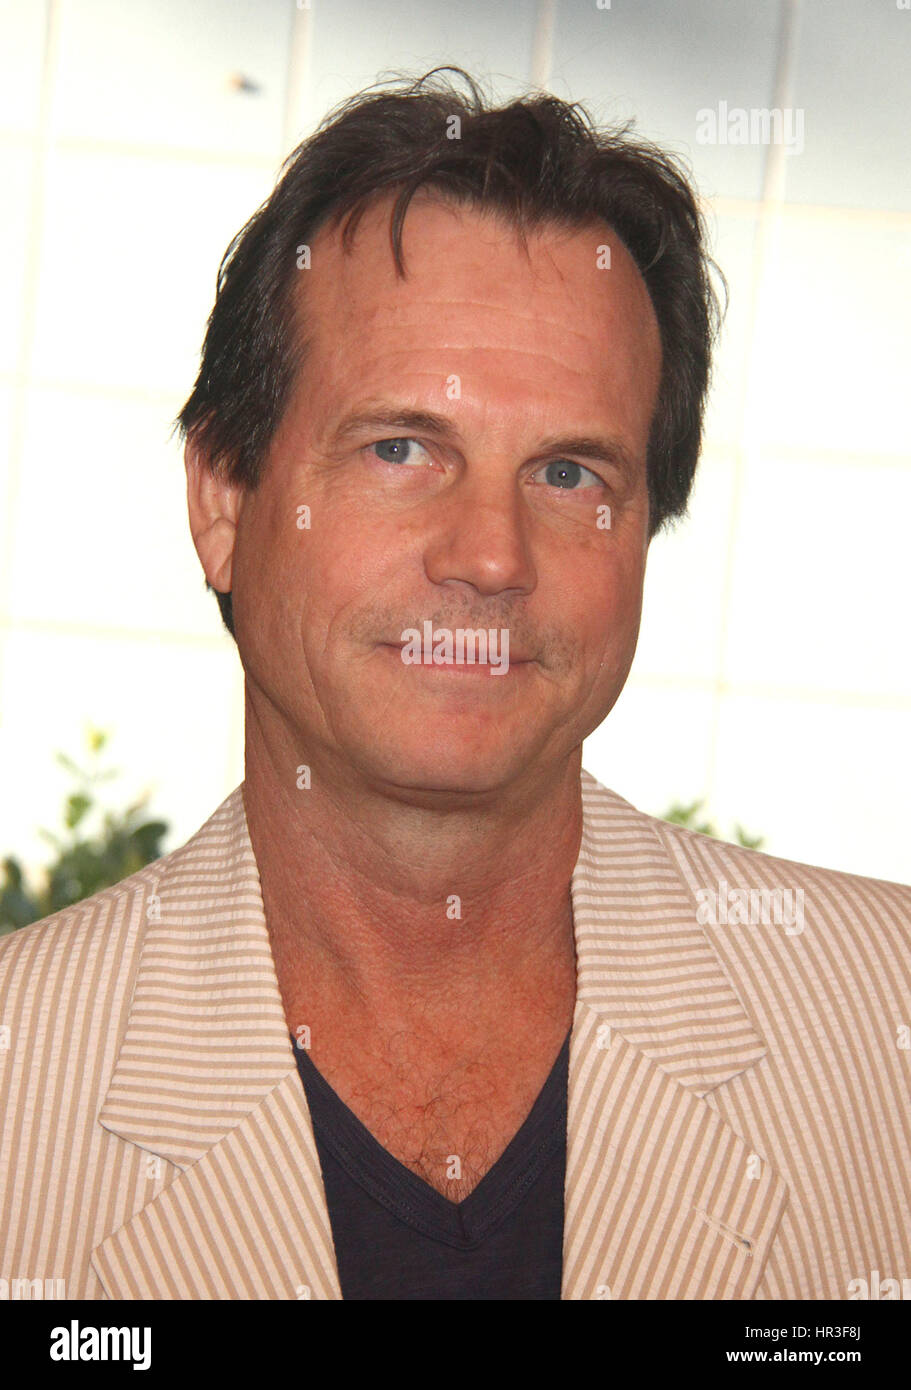 February 26, File - WILLIAM 'BILL' PAXTON (May 17, 1955 - February 25, 2017) was an American actor and director. The films in which he appeared include The Terminator (1984), Weird Science (1985), Aliens (1986), Predator 2 (1990), True Lies (1994), Apollo 13 (1995), Twister (1996), and Titanic (1997). Paxton also starred in the HBO series Big Love (2006Ð2011) and was nominated for an Emmy Award for the miniseries Hatfields & McCoys. Paxton died from complications during heart surgery during post-op and suffered a fatal stroke. Pictured: July 29, 2013 - New York, New York, U.S. - Actor BILL PAX Stock Photo